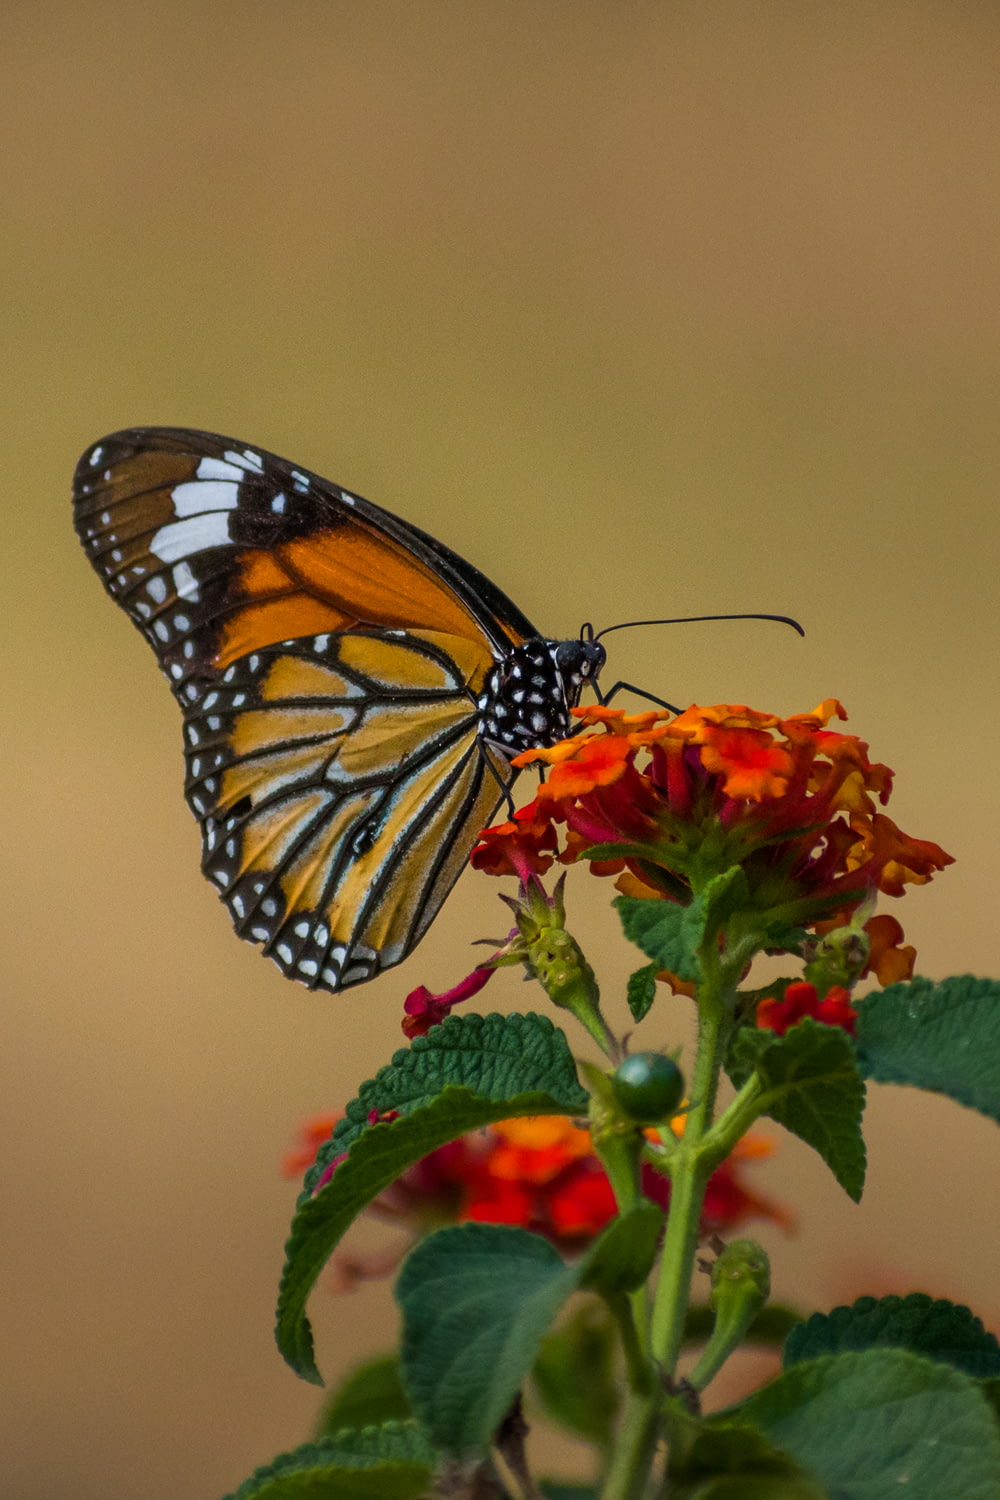 monarch butterfly perched on red flower in close up photography during daytime